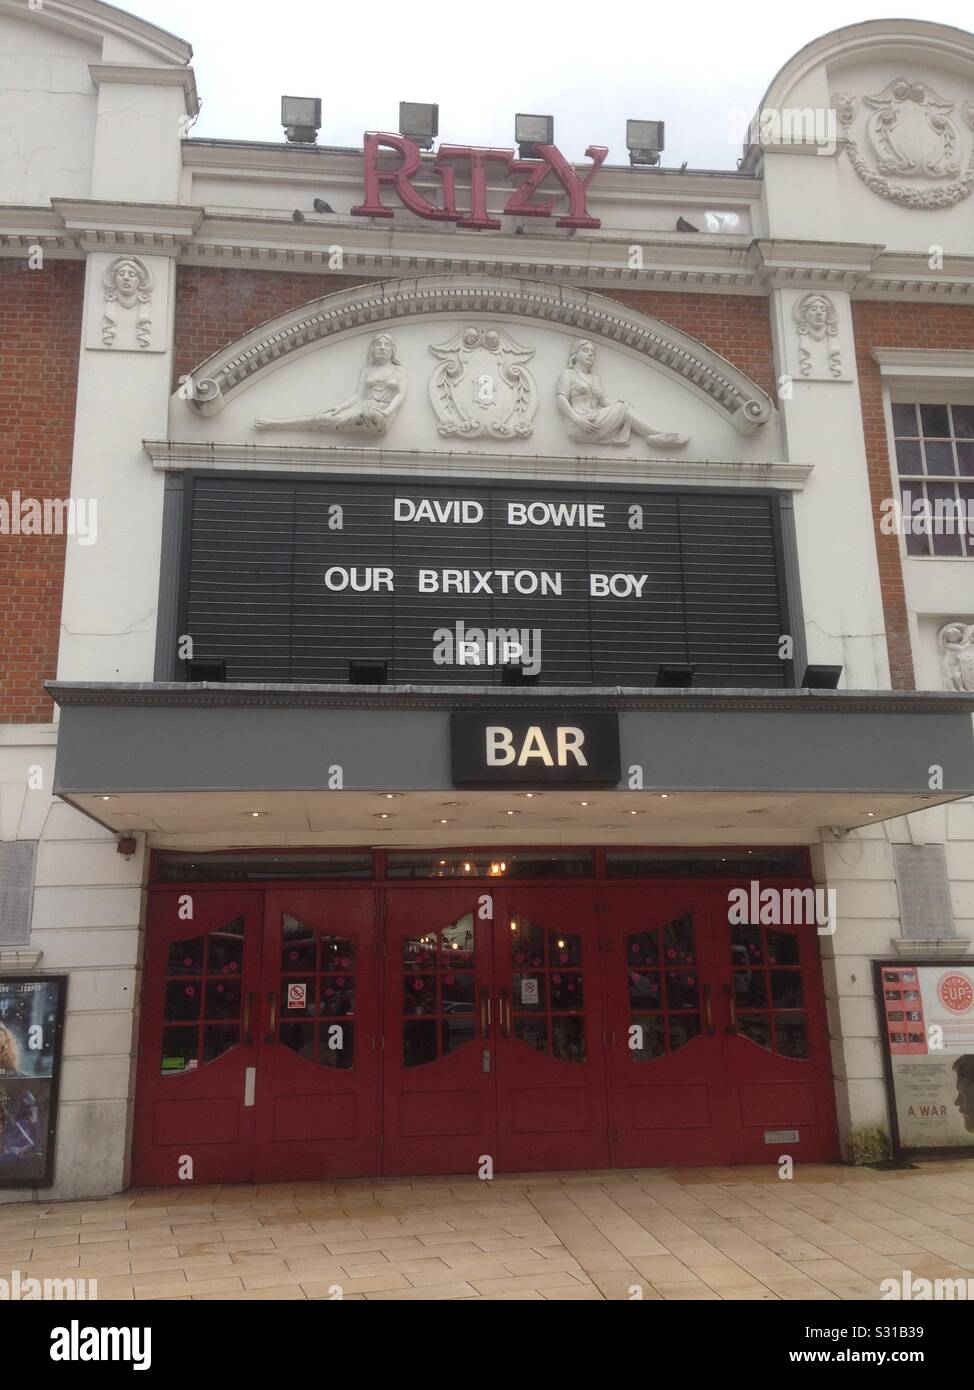 David Bowie tribute at the Ritzy Cinema in Brixton. Stock Photo